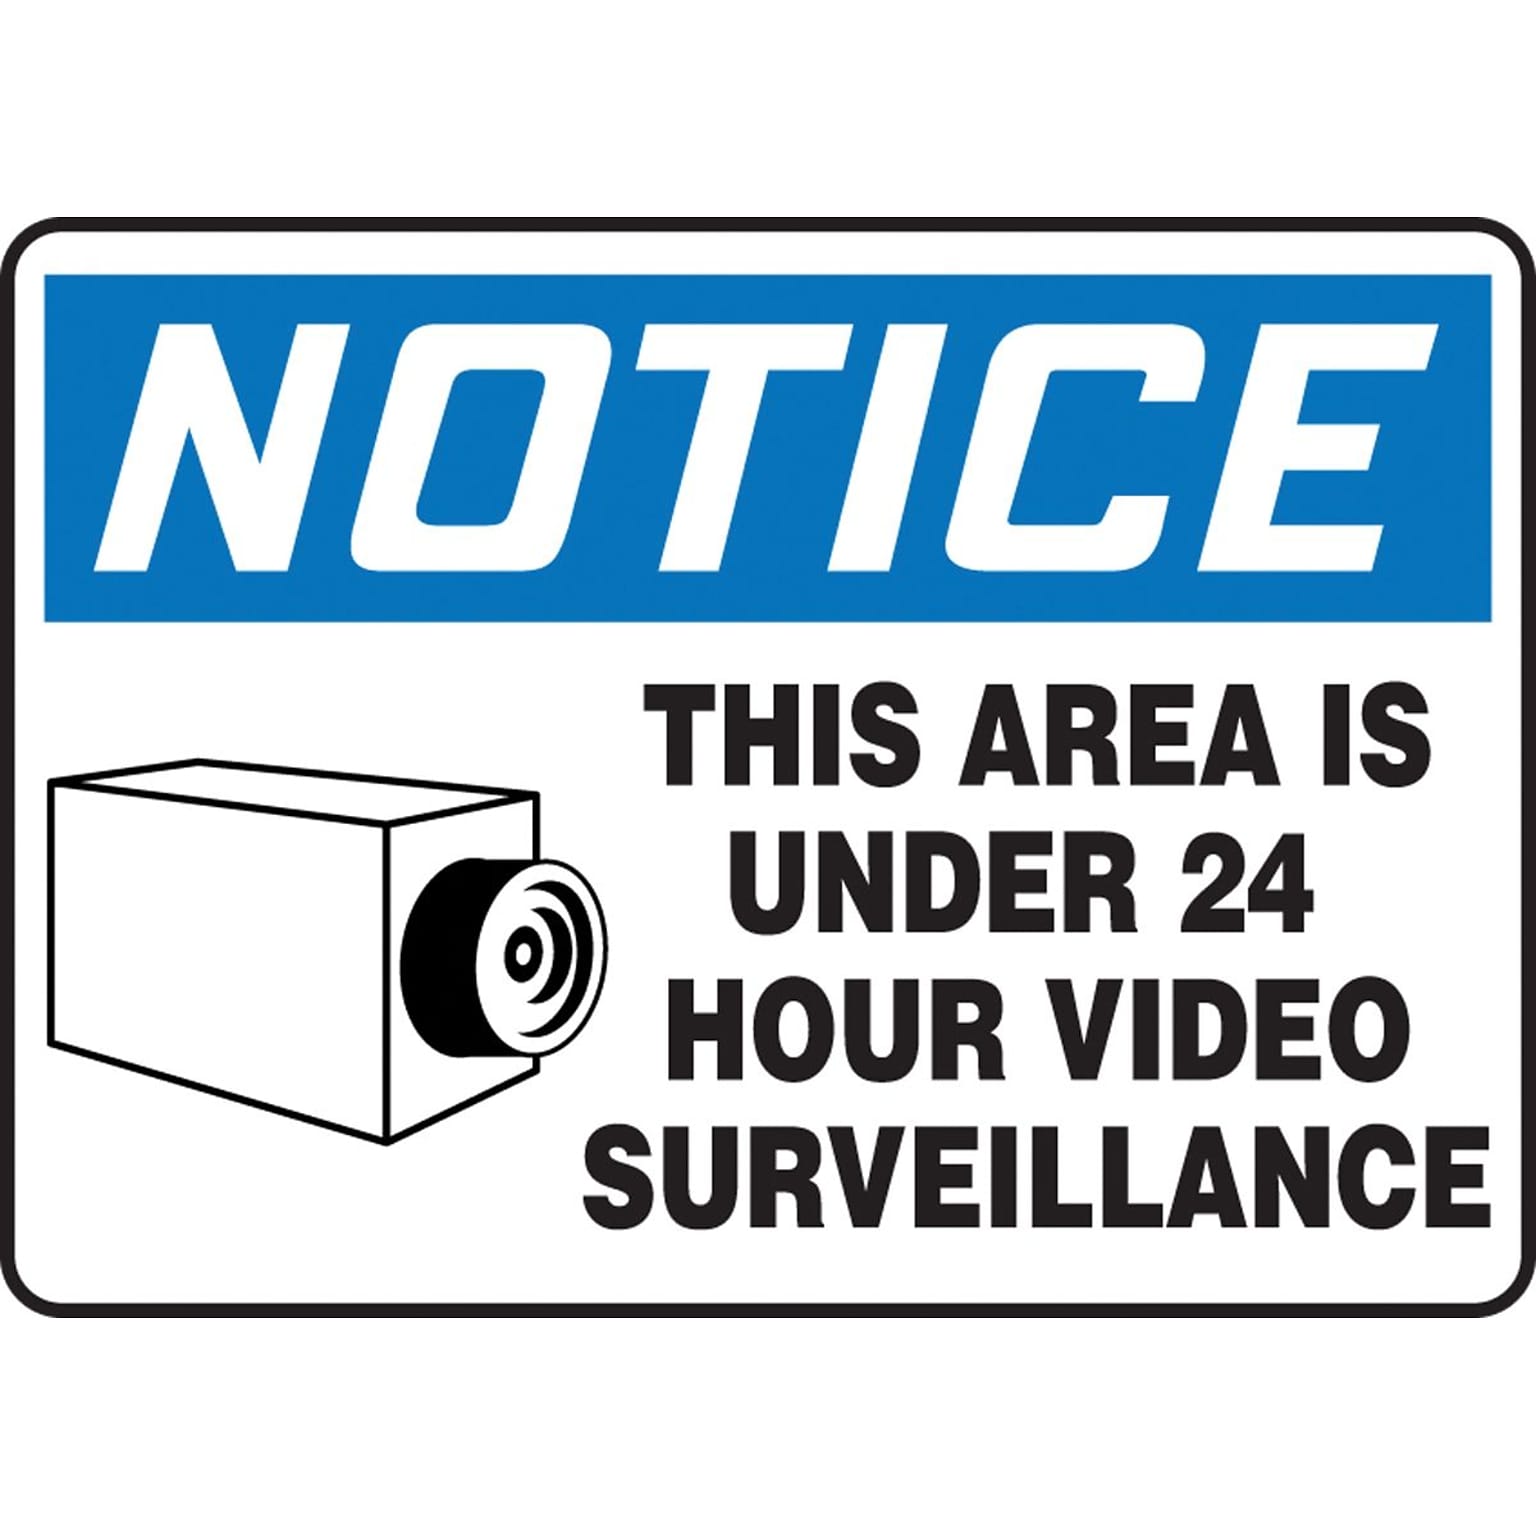 Accuform Signs® 10 x 14 Plastic Safety Sign NOTICE THIS AREA IS..W/GRAPHIC, Blue/Black On White